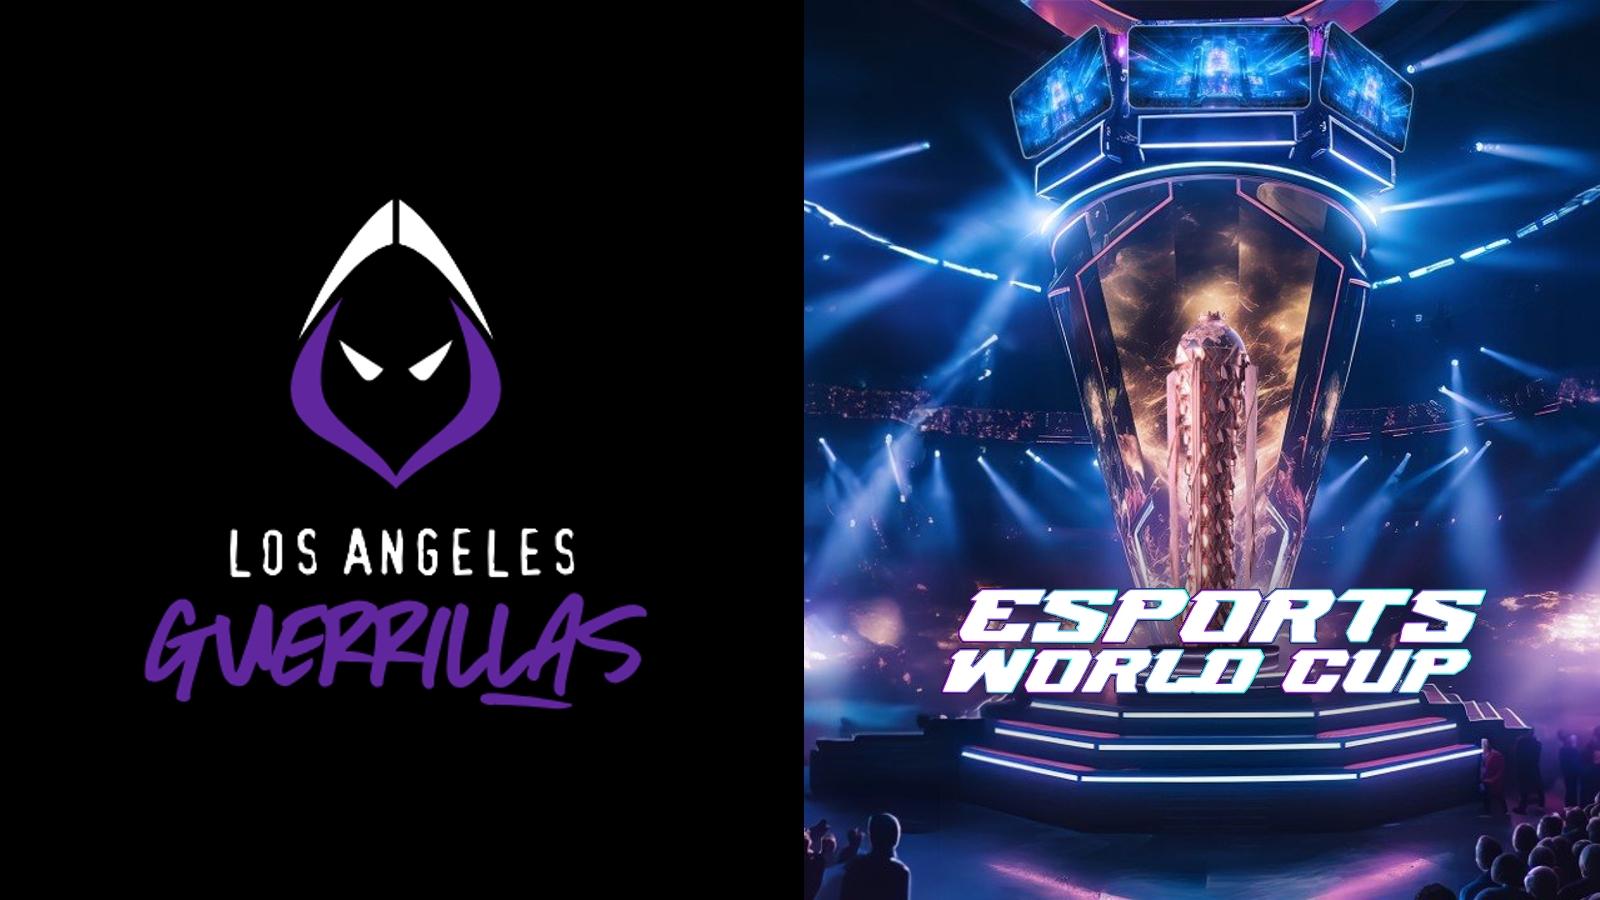 side by side image of the LA Guerrillas logo and the Esports World Cup